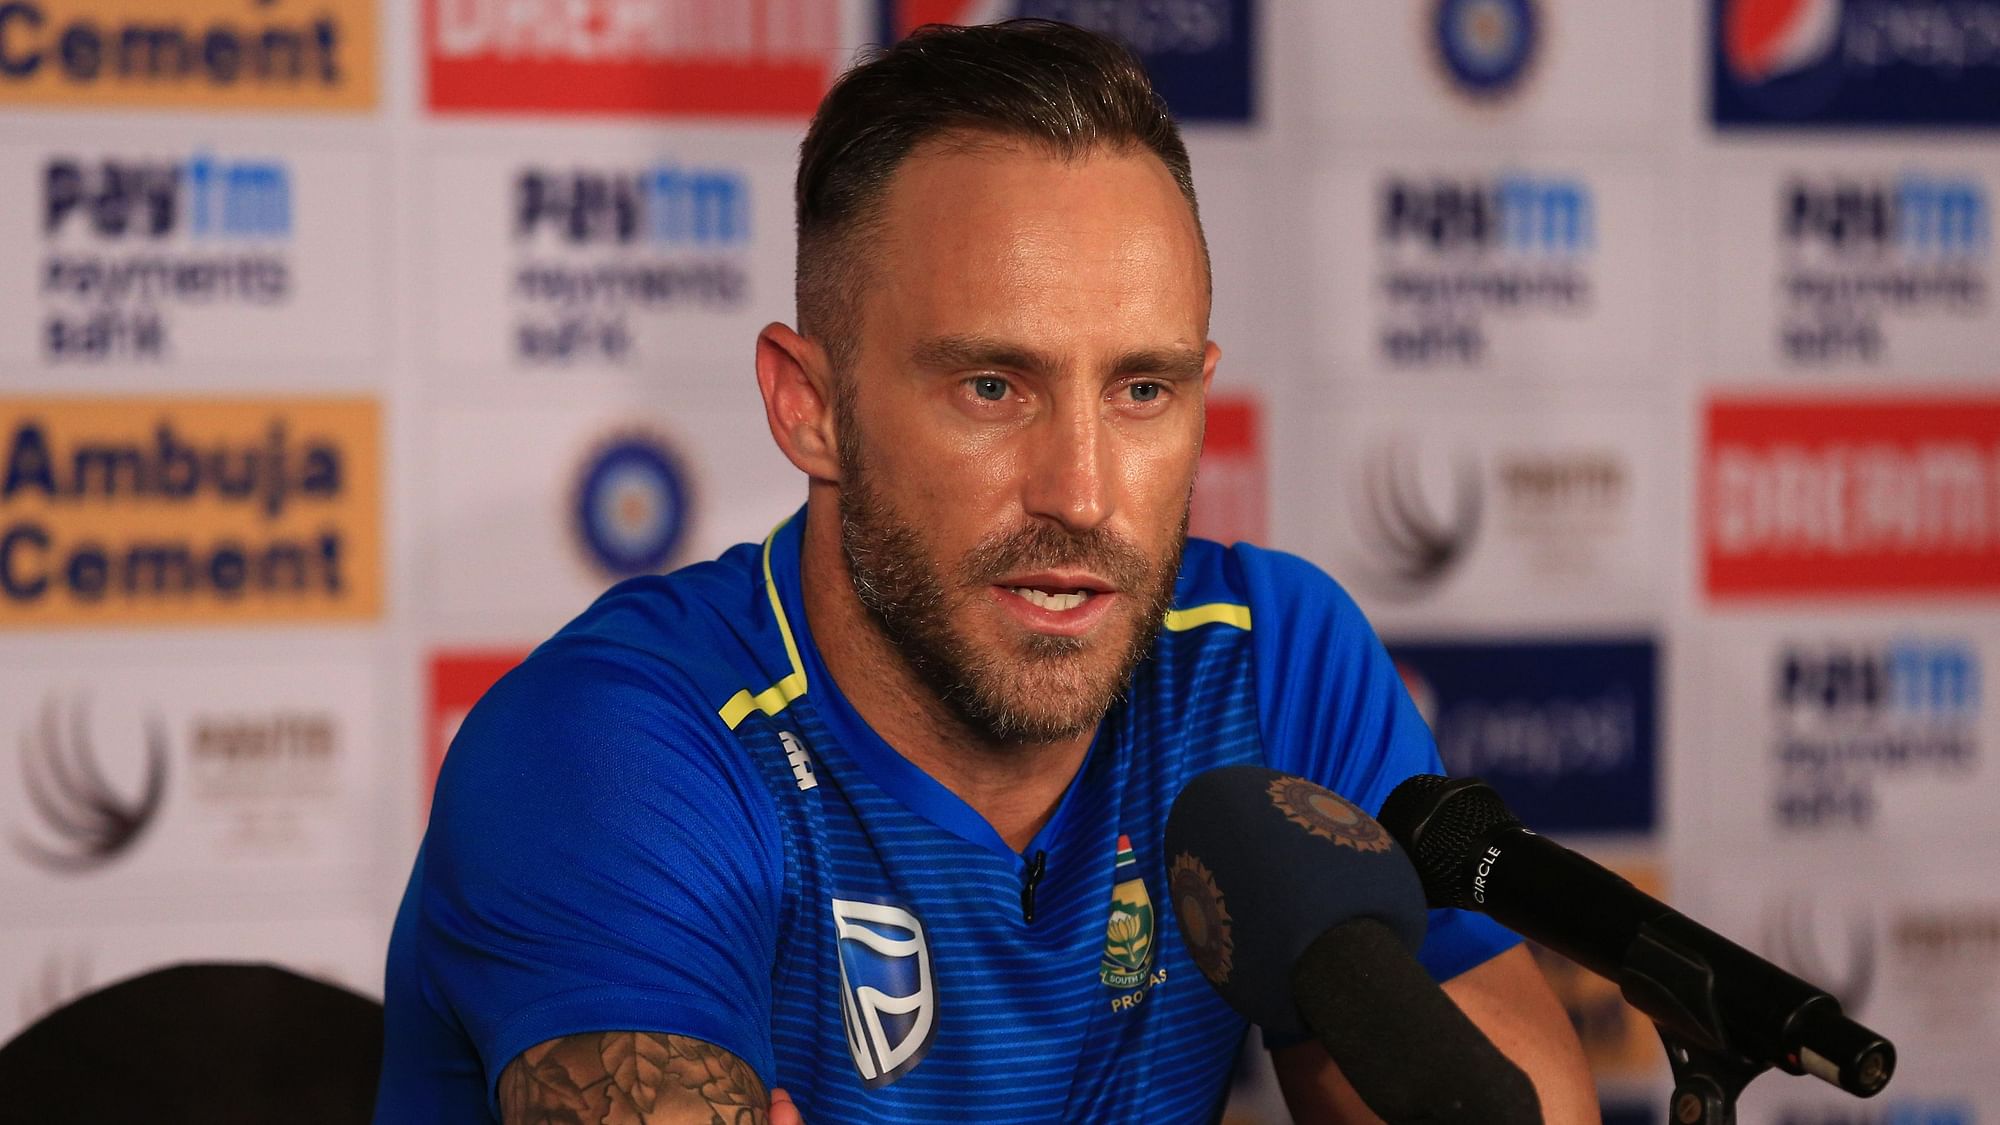 Faf du Plessis put his hands up and said that as captain he needs to show the way along with Quinton de Kock and Dean Elgar.